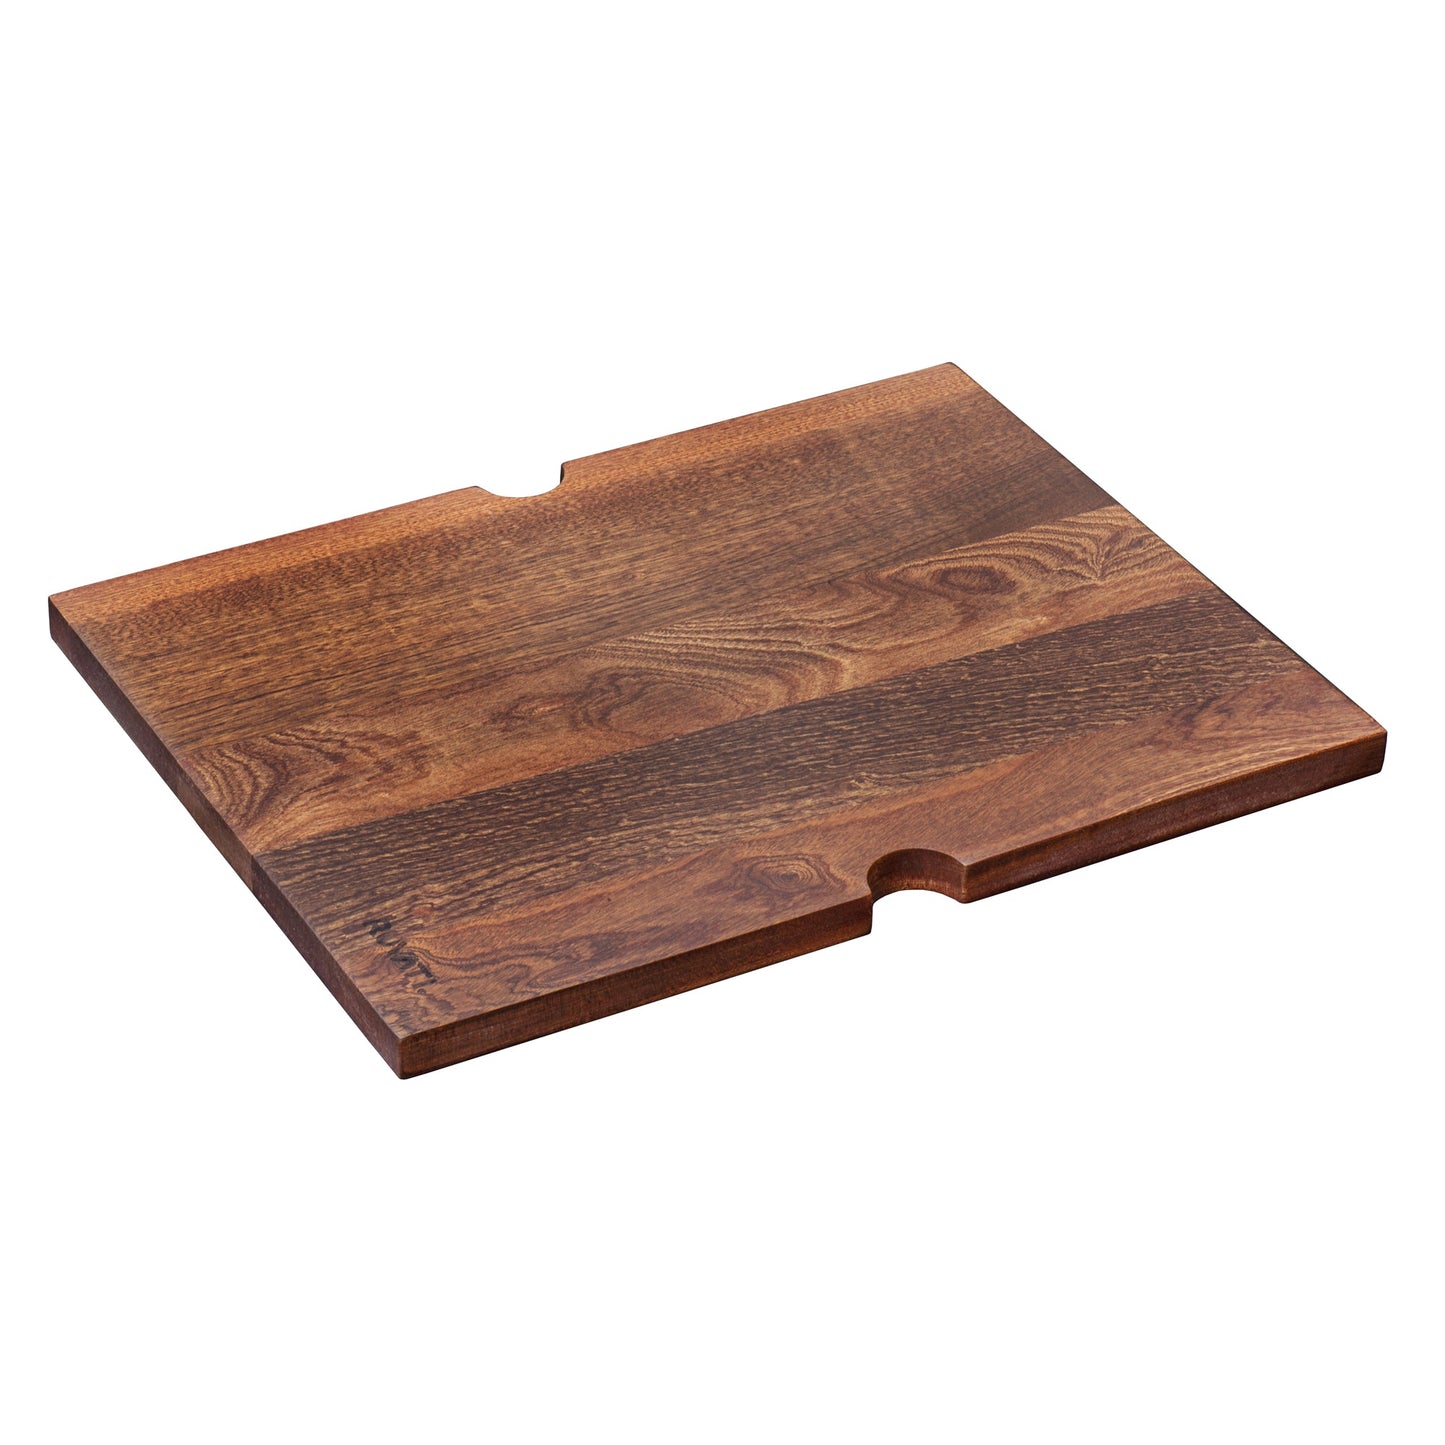 Ruvati 13" x 17" Solid Wood Replacement Cutting Board Sink Cover For Workstation Sink